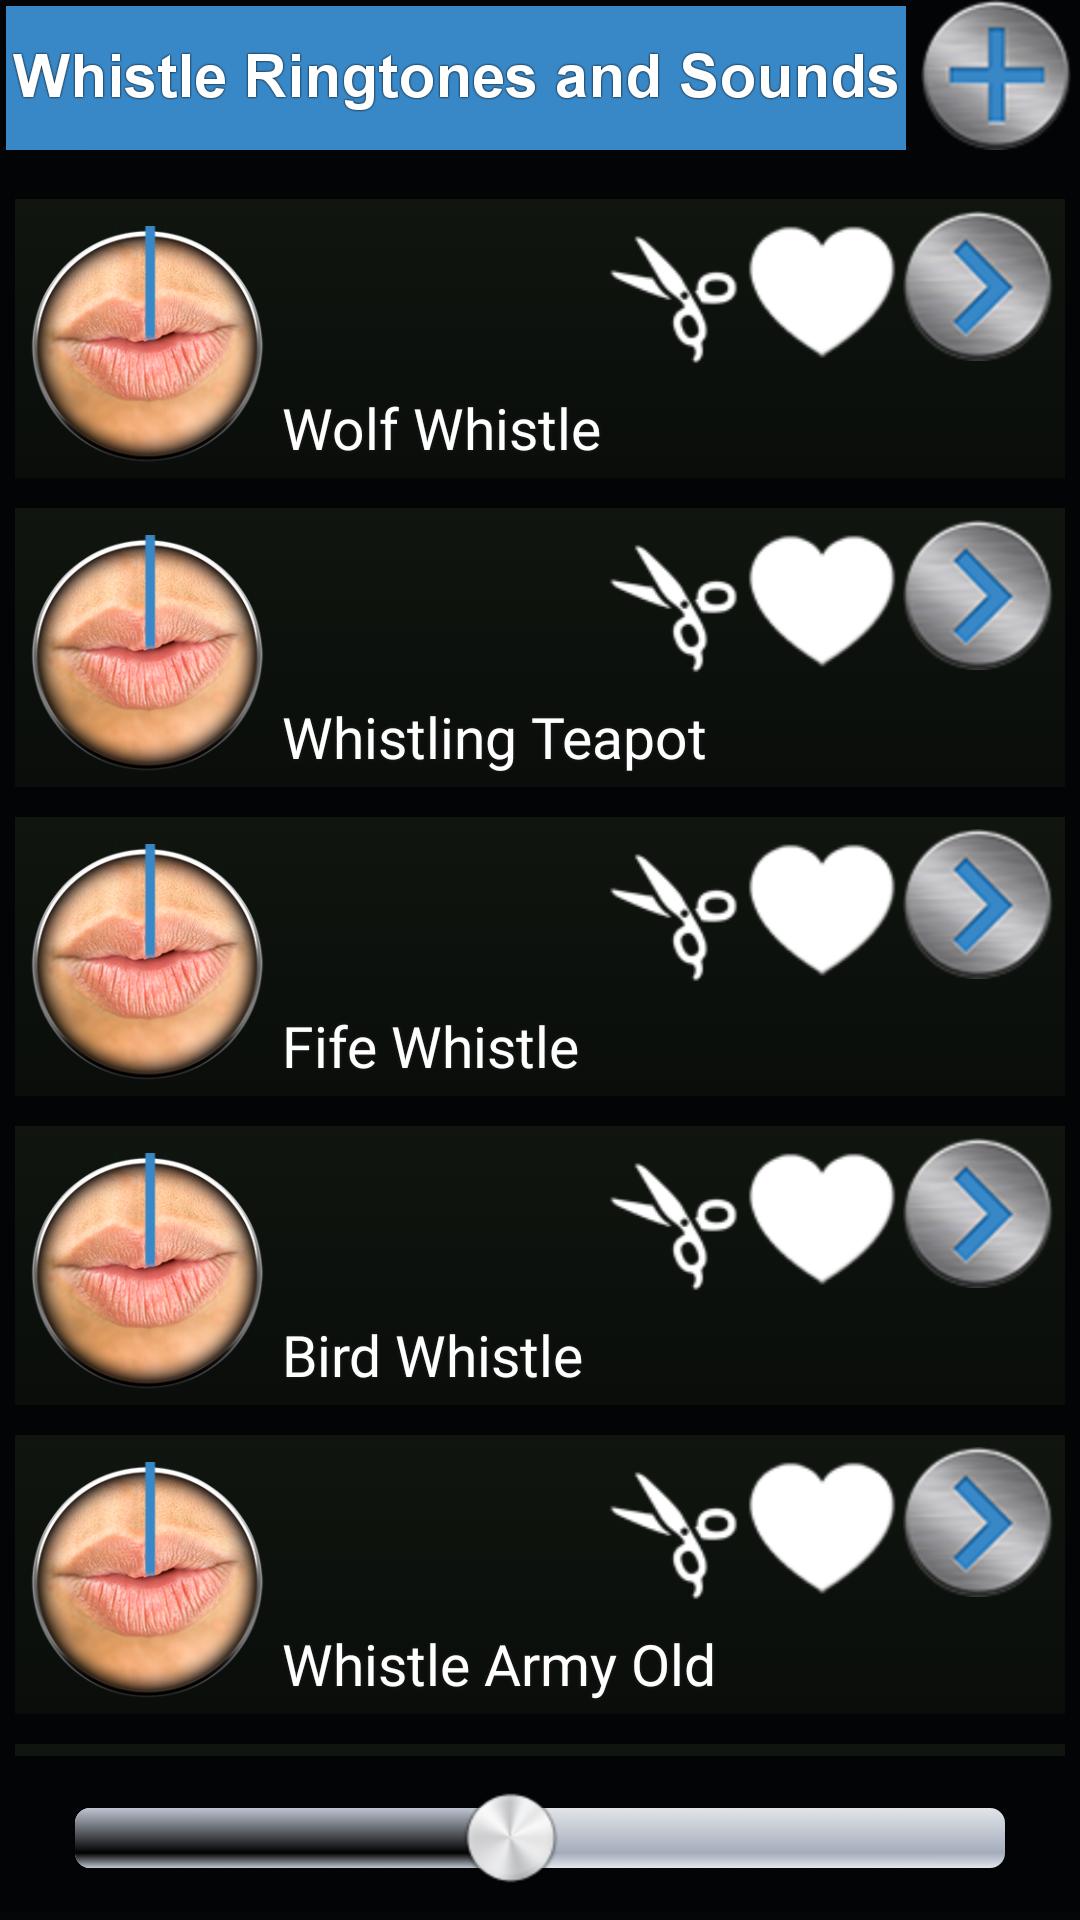 Whistle Ringtones And Sounds for Android - APK Download